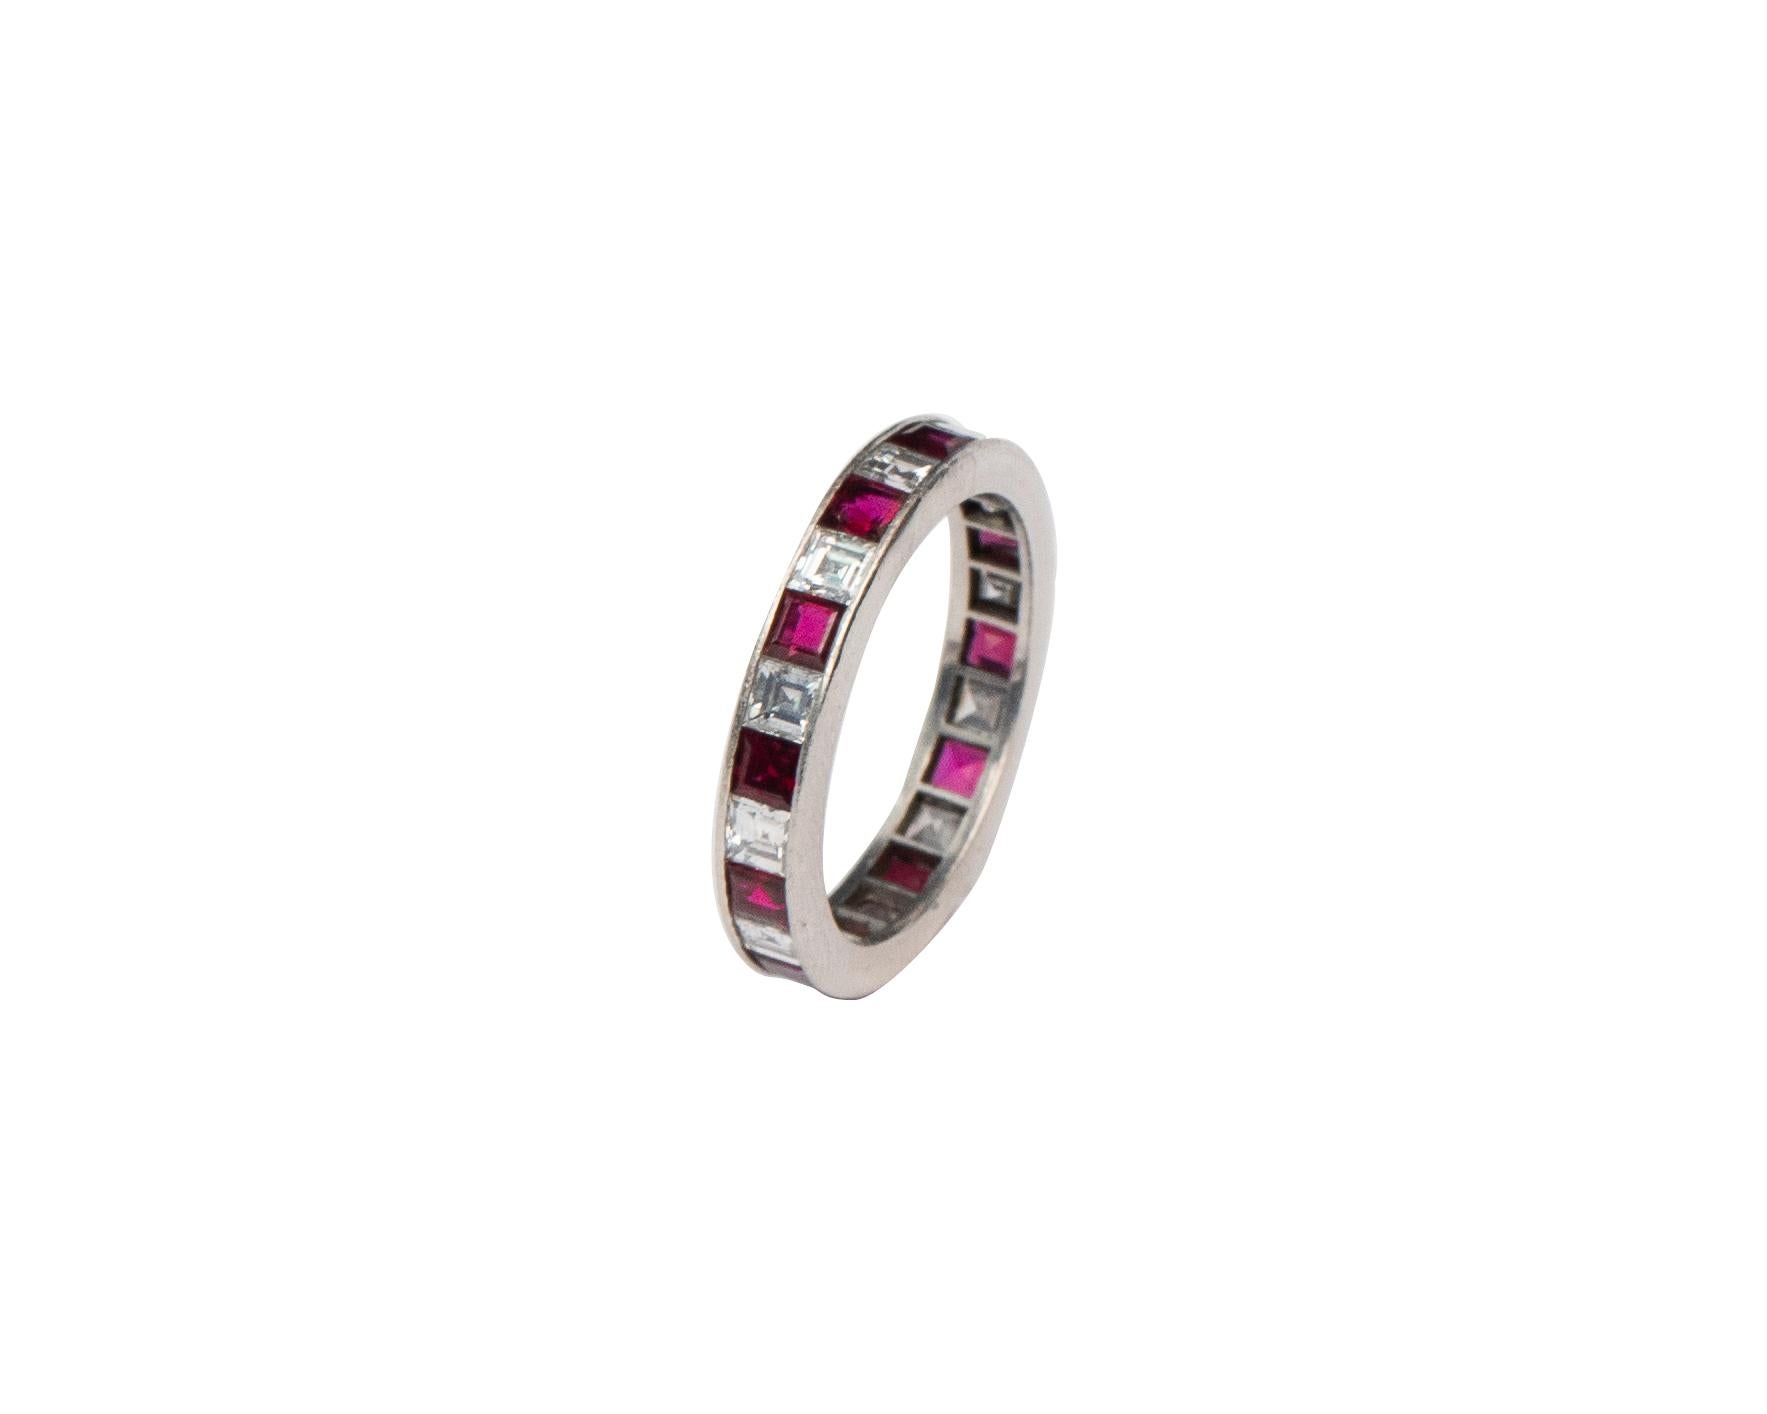 This piece is a genuine vintage style eternity band with over 4 carats of beautiful, perfectly matched, diamonds and rubies channel set in platinum! There is a pierced open back pattern throughout the ring to allow light and brilliance to be at a